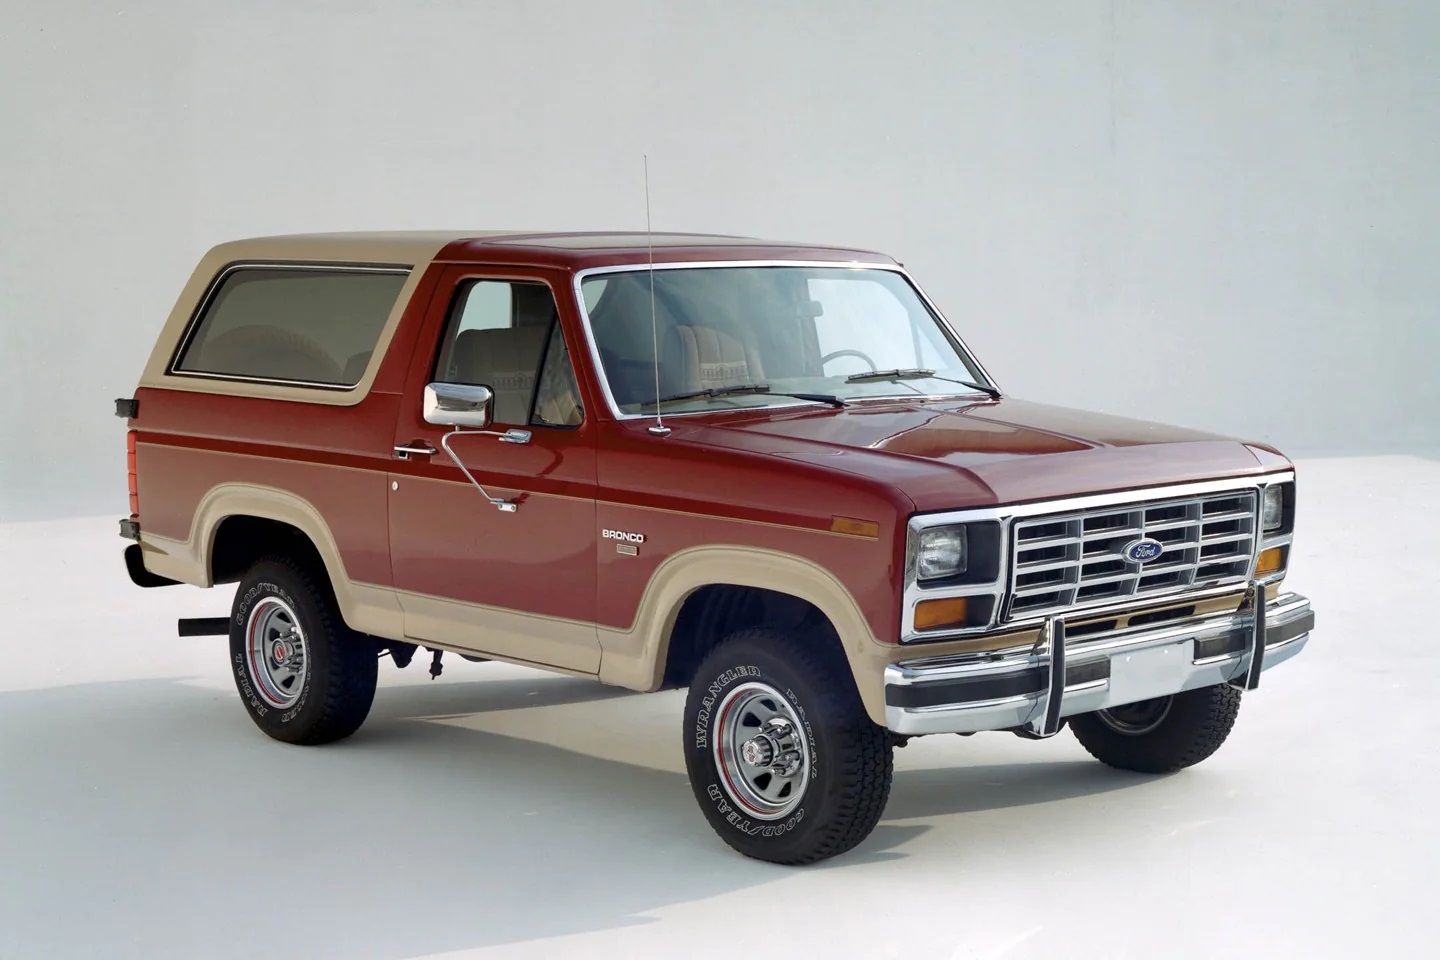 The 1985 Ford Bronco for sale. 